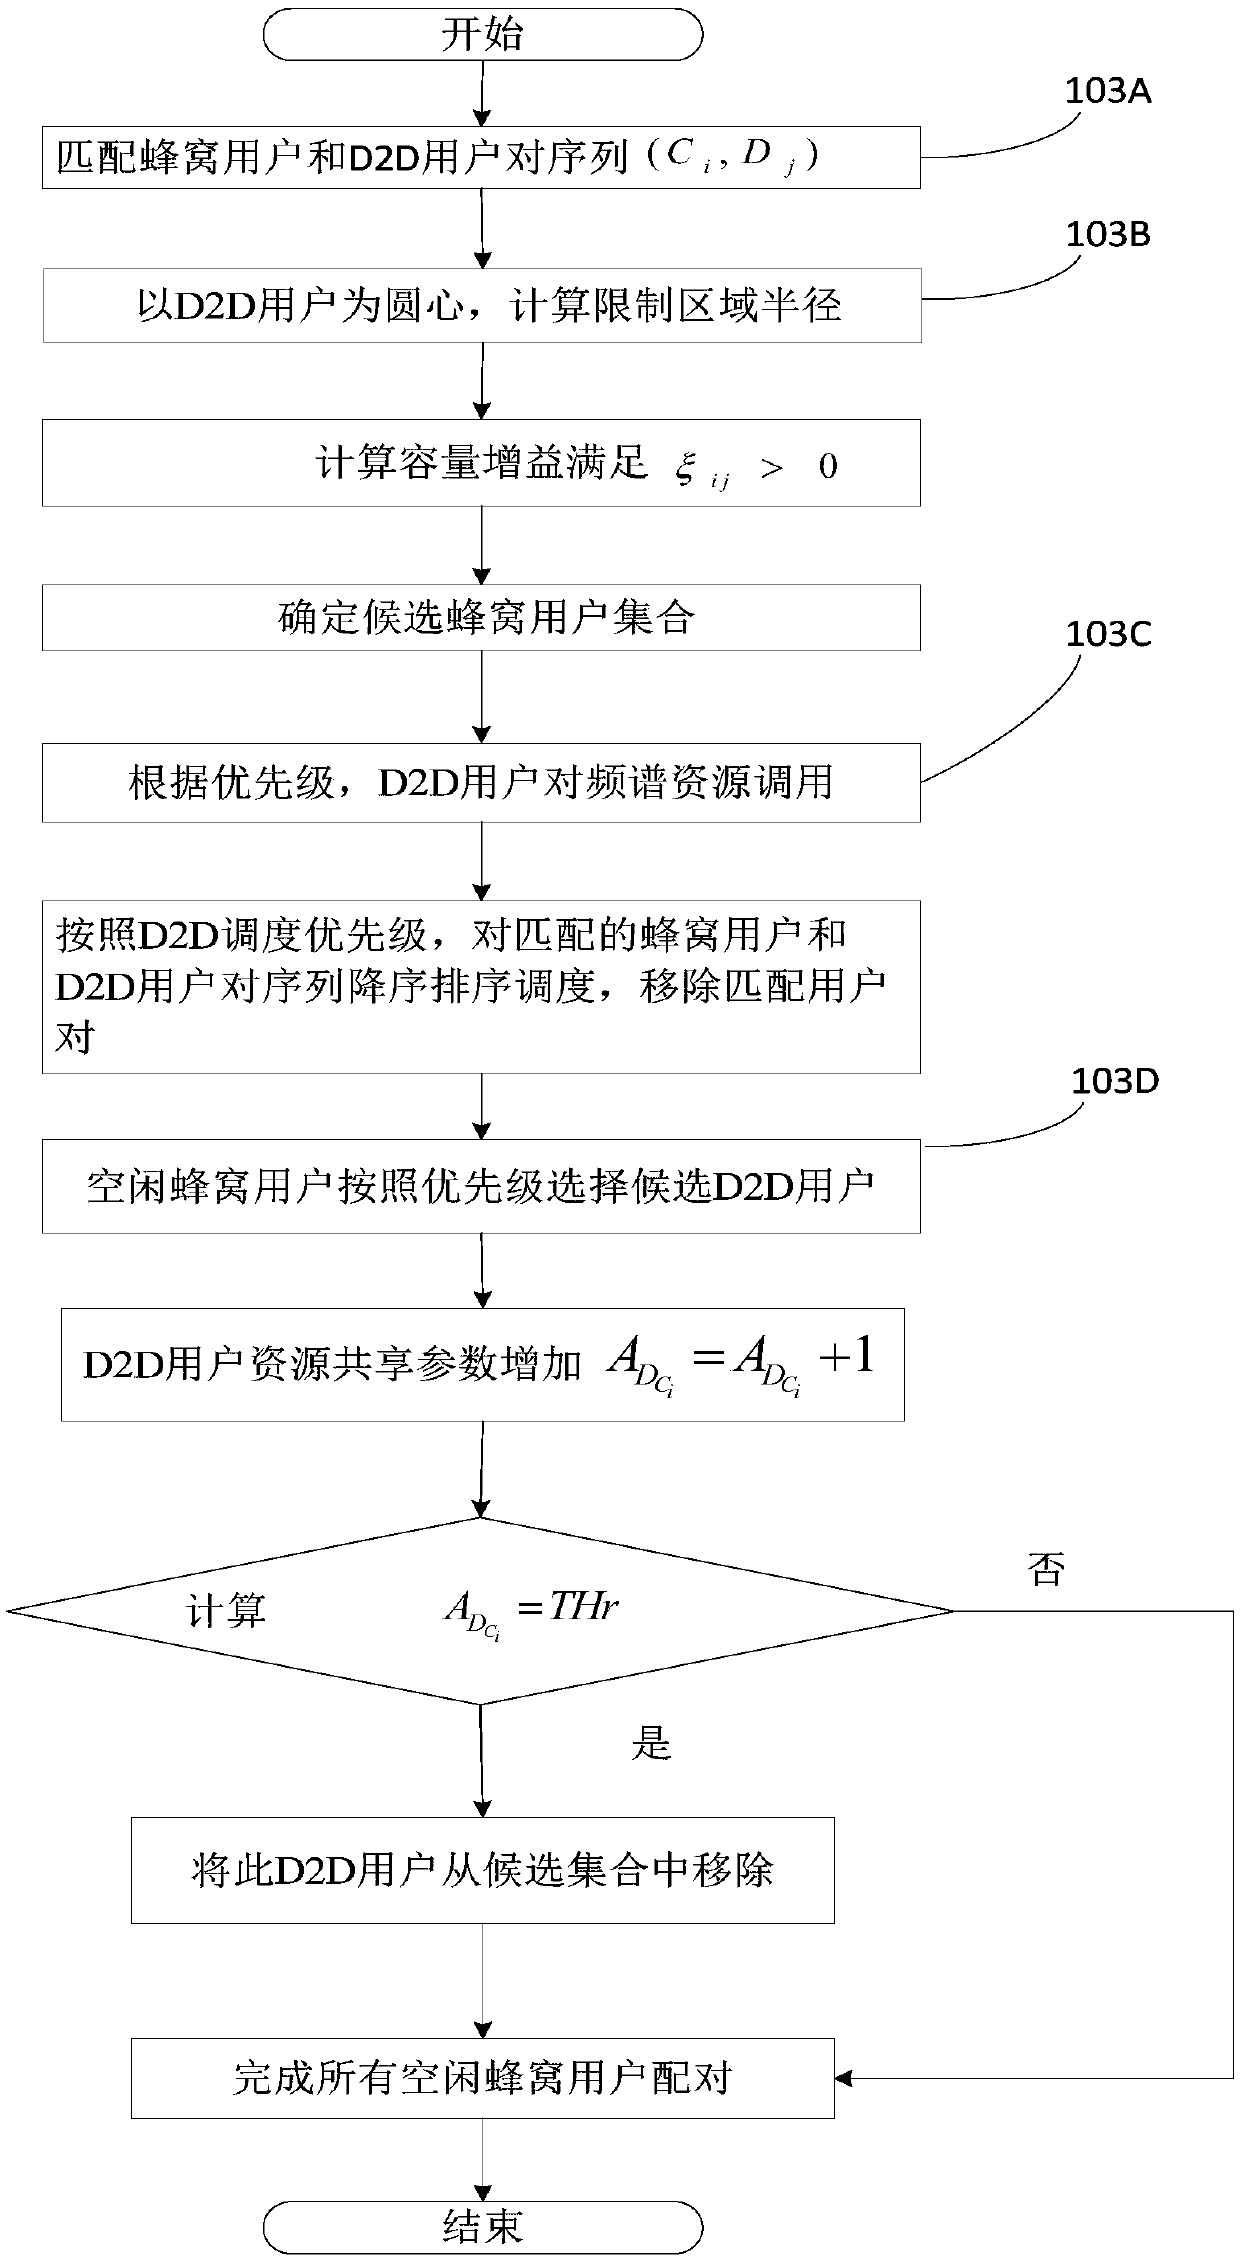 Resource scheduling optimization method based on channel signatures in D2D communication network